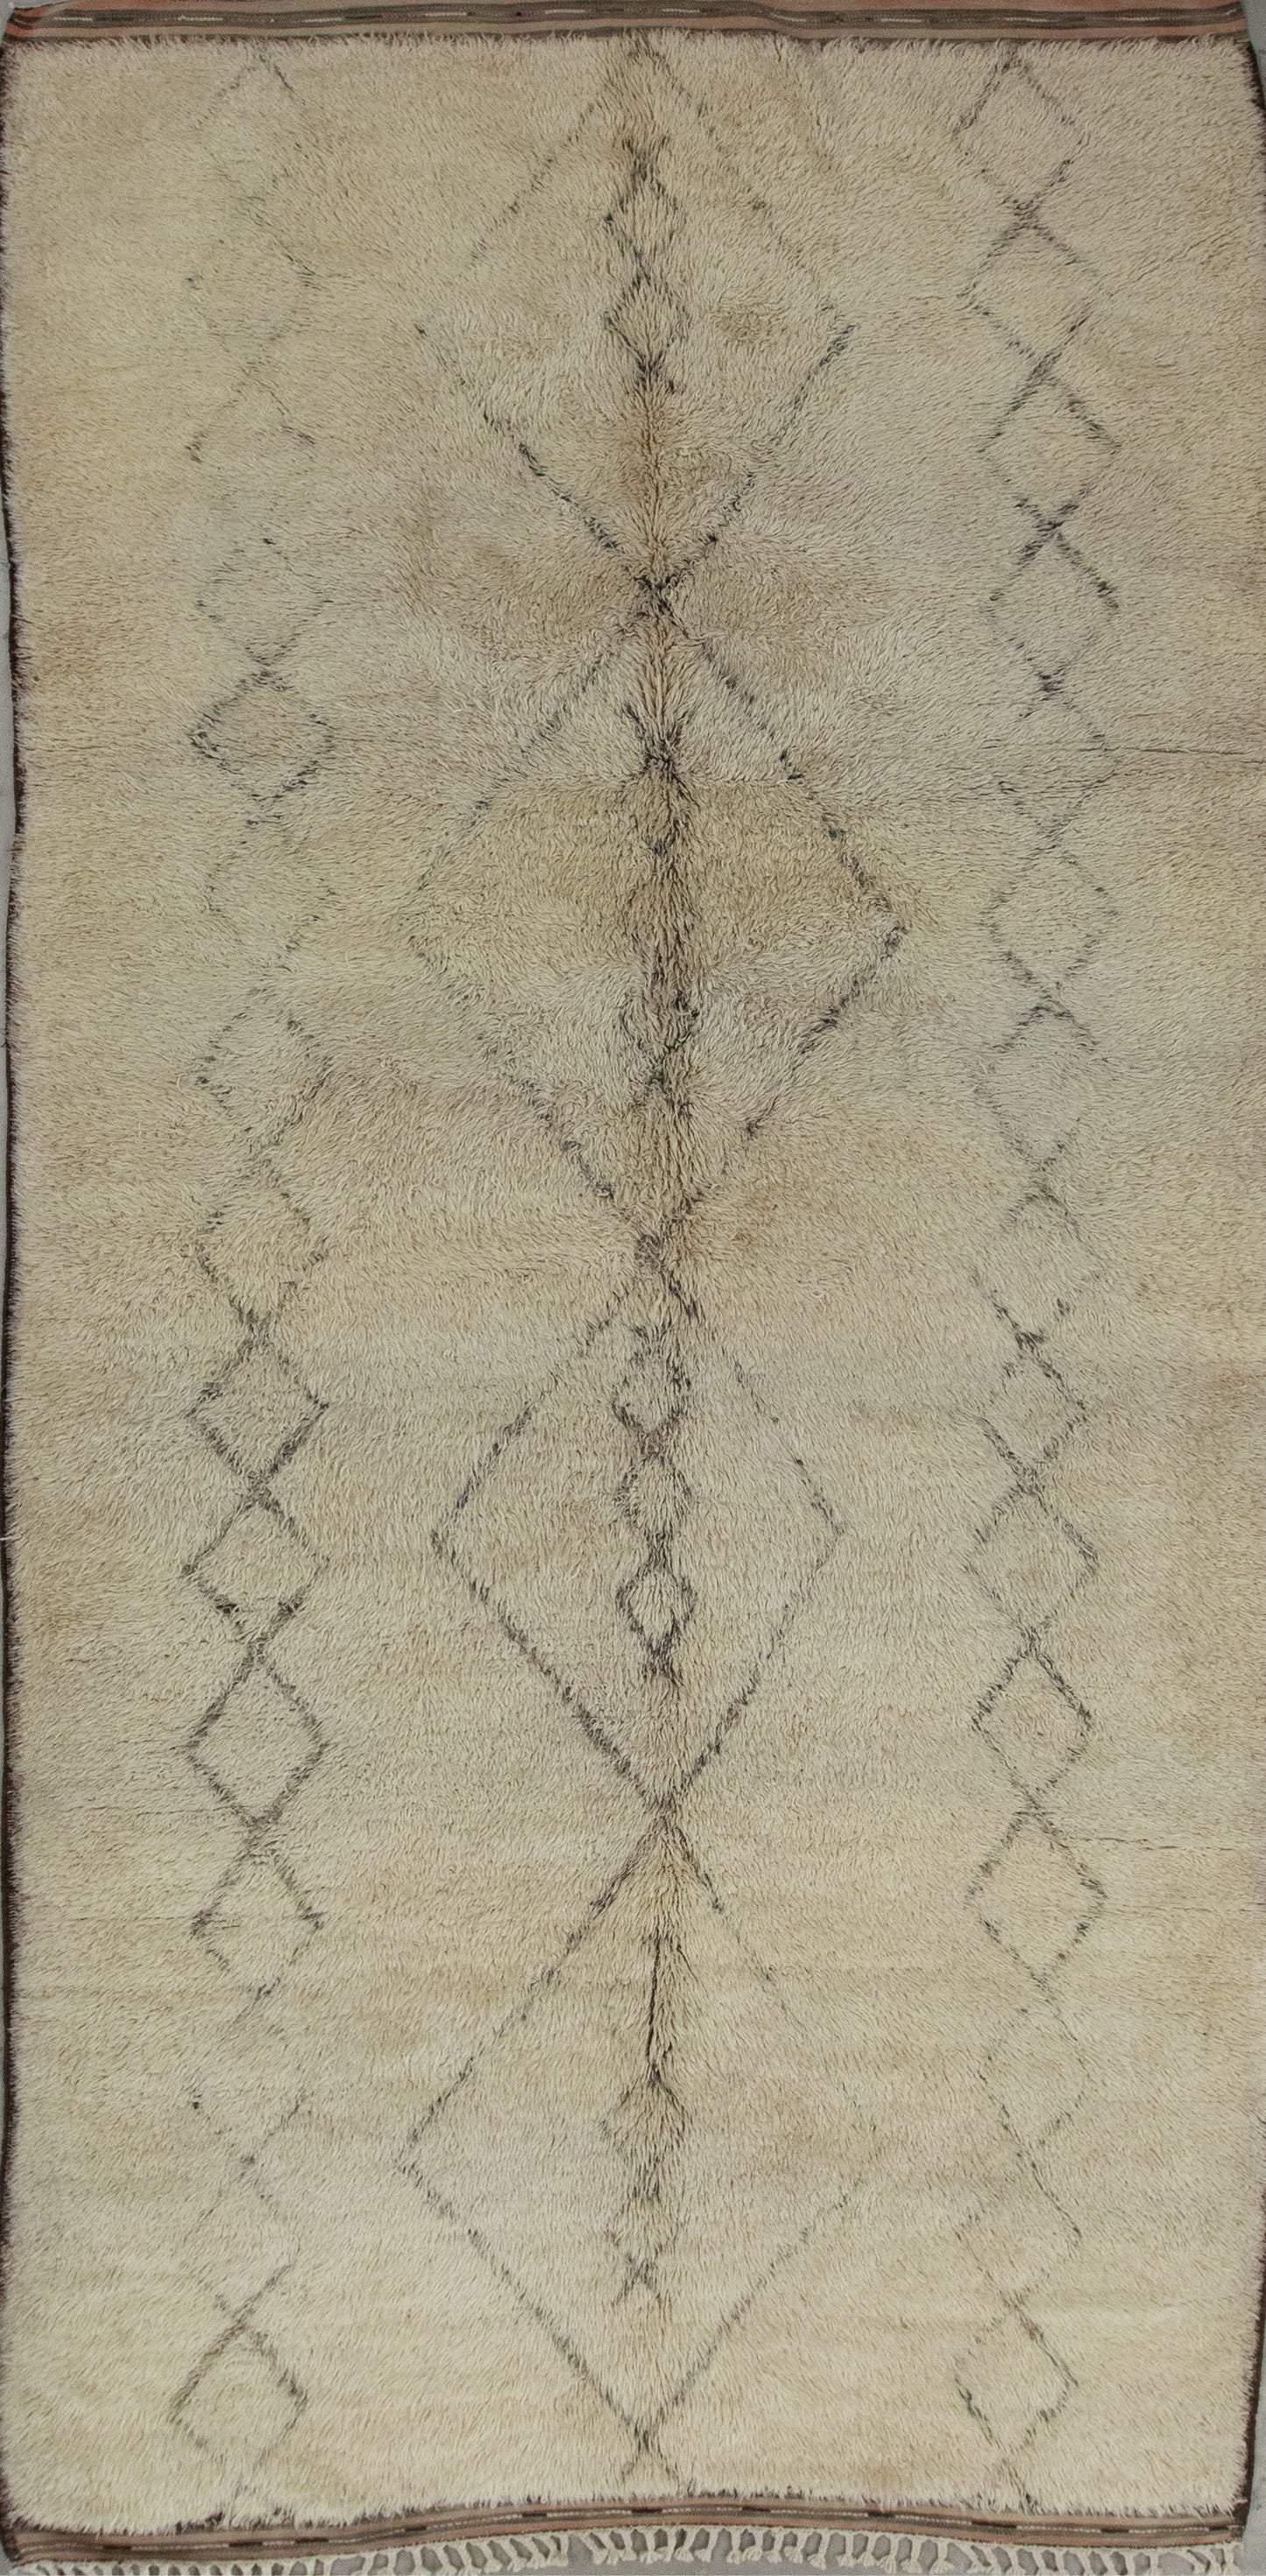 Off-white rug with two thin columns of rhombuses placed each one on each side of the main four central diamonds composition.